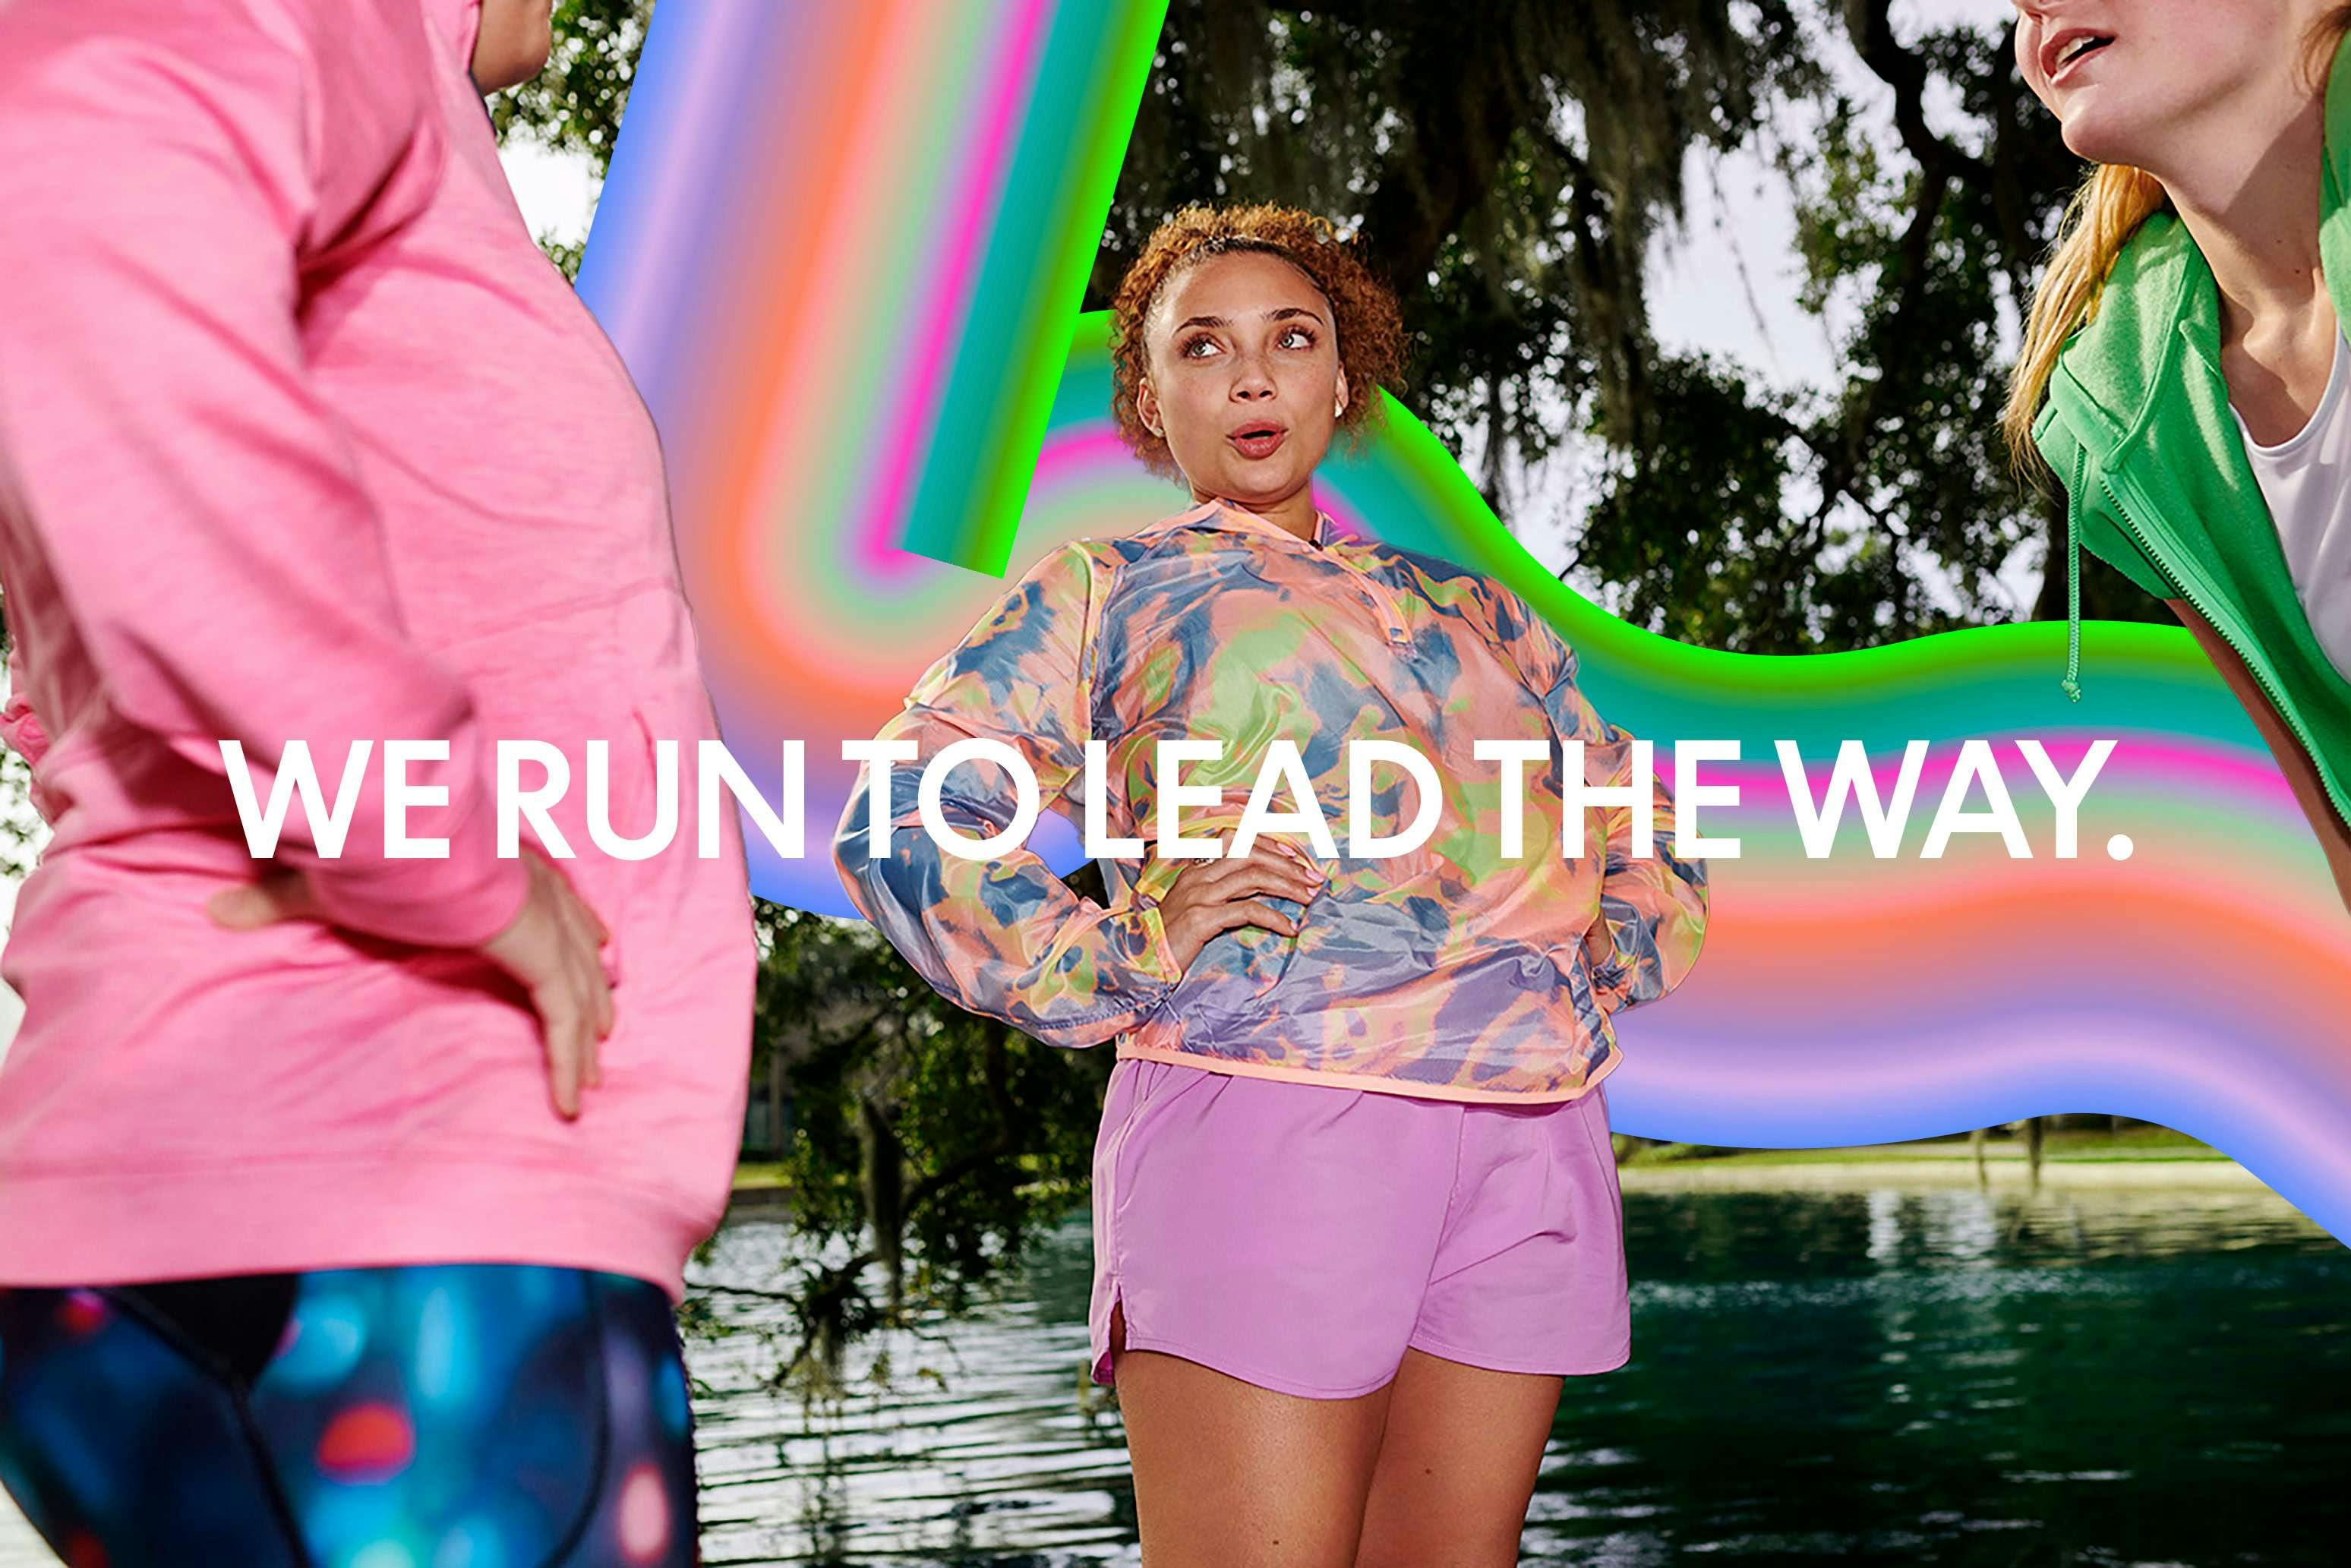 Image with text says "We run to lead the way."